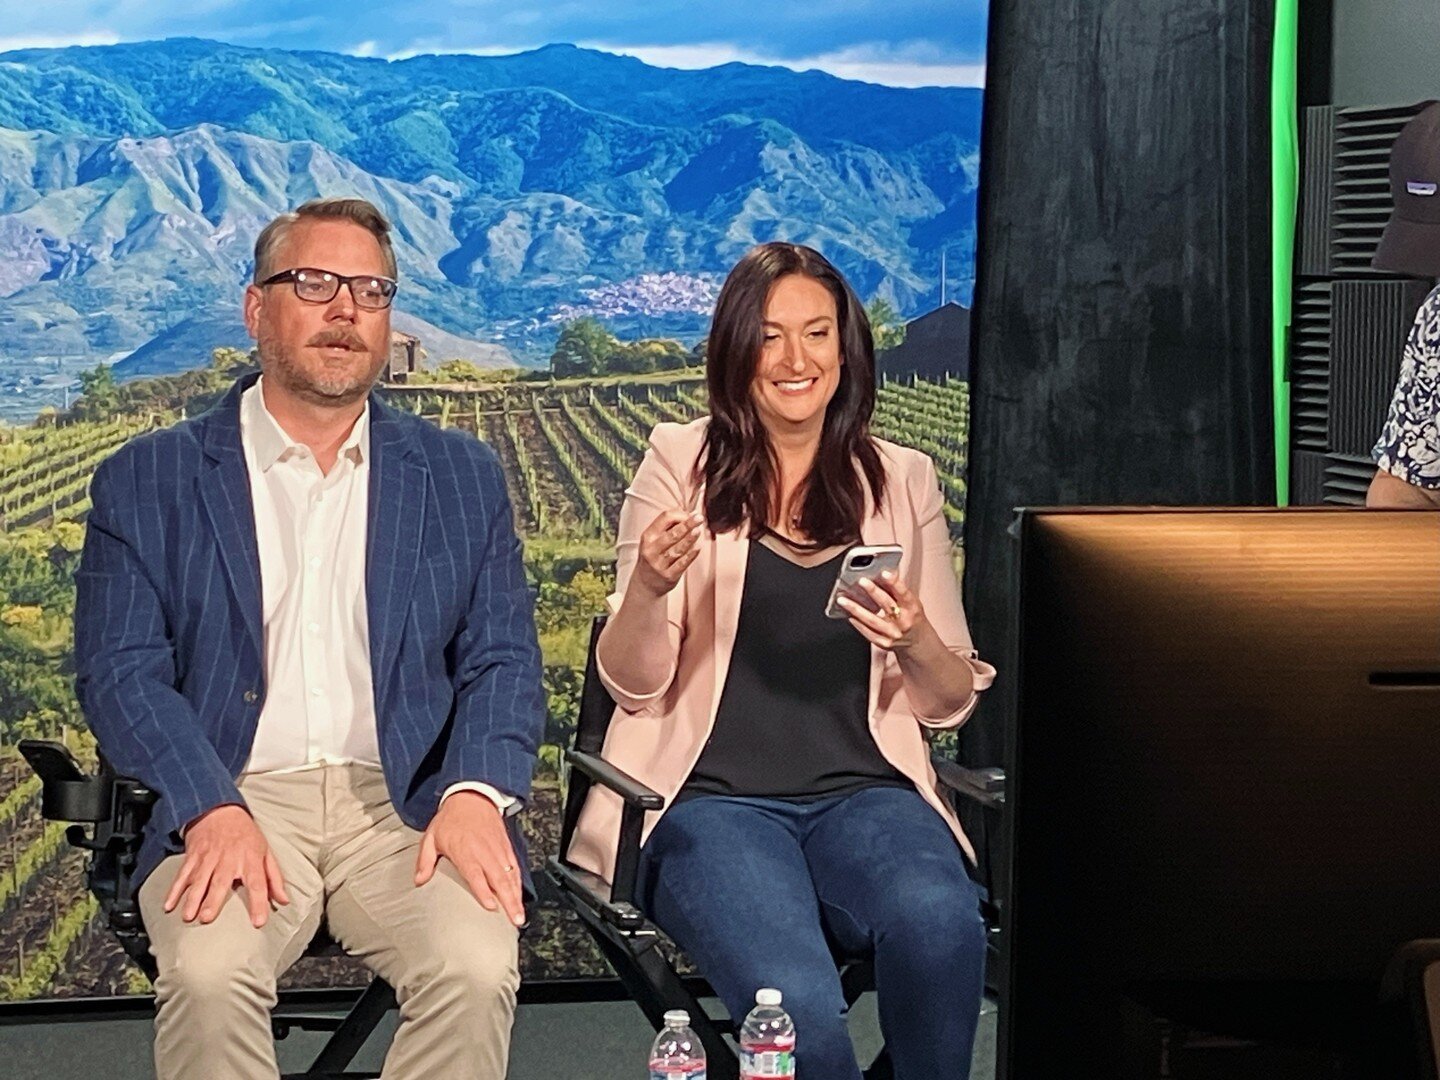 In studio, behind the scenes of this morning's @winebusinessmonthly Tasting Room Survey Results Webinar. What you didn't see: Me, teasing Ryan @northbay.live for being a Giants fan, @nomaduck rolling his eyes, multiple technical issues (on my part), 